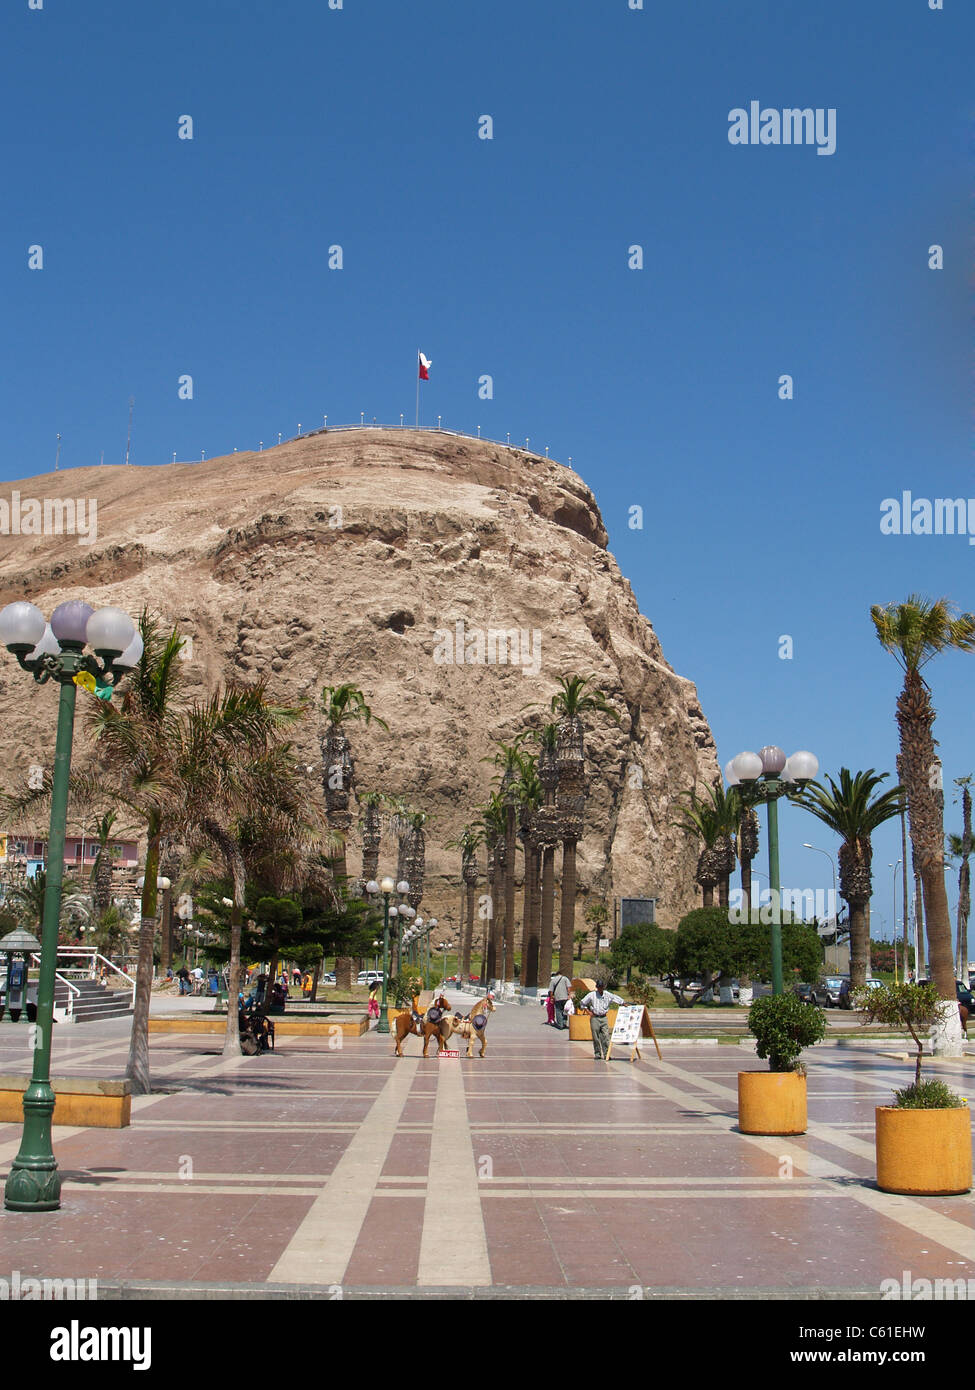 A view of El Morro from plaza,Arica, Chile Stock Photo